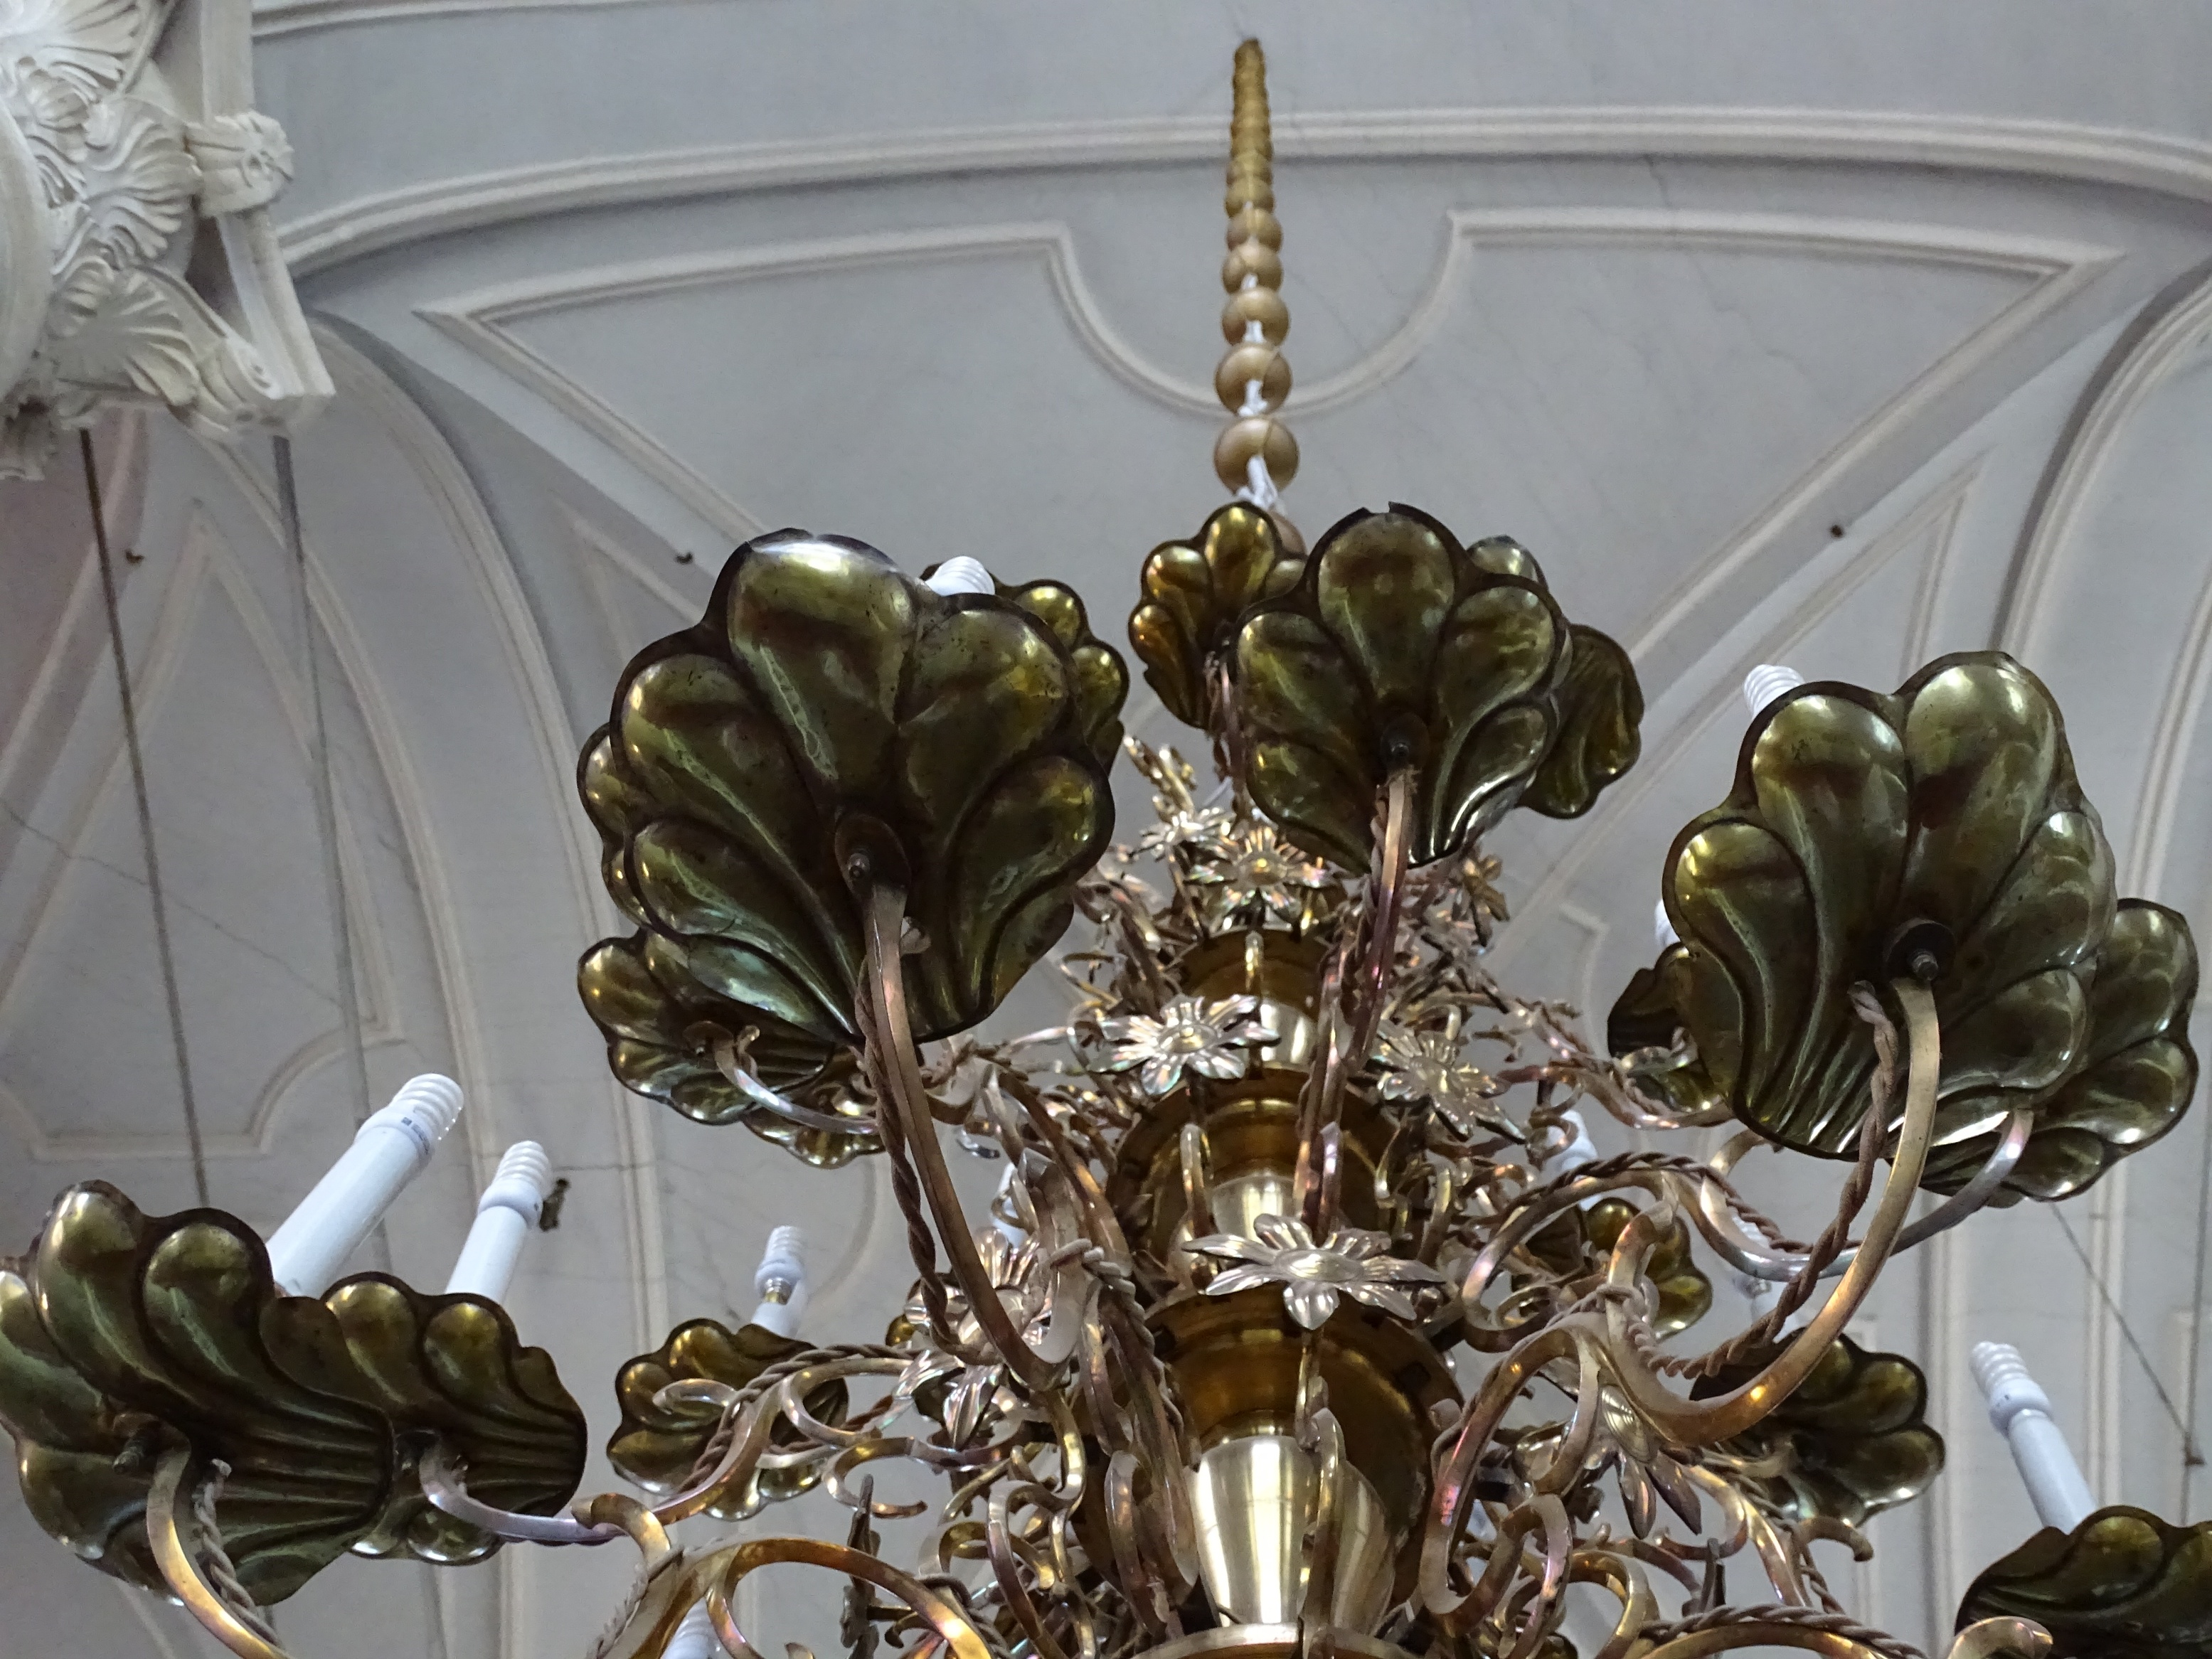 Fragment of the chandelier, 1770, Liepāja Holy Trinity Evangelical Lutheran Cathedral. Photo by Alantė Valtaitė-Gagač, 2021